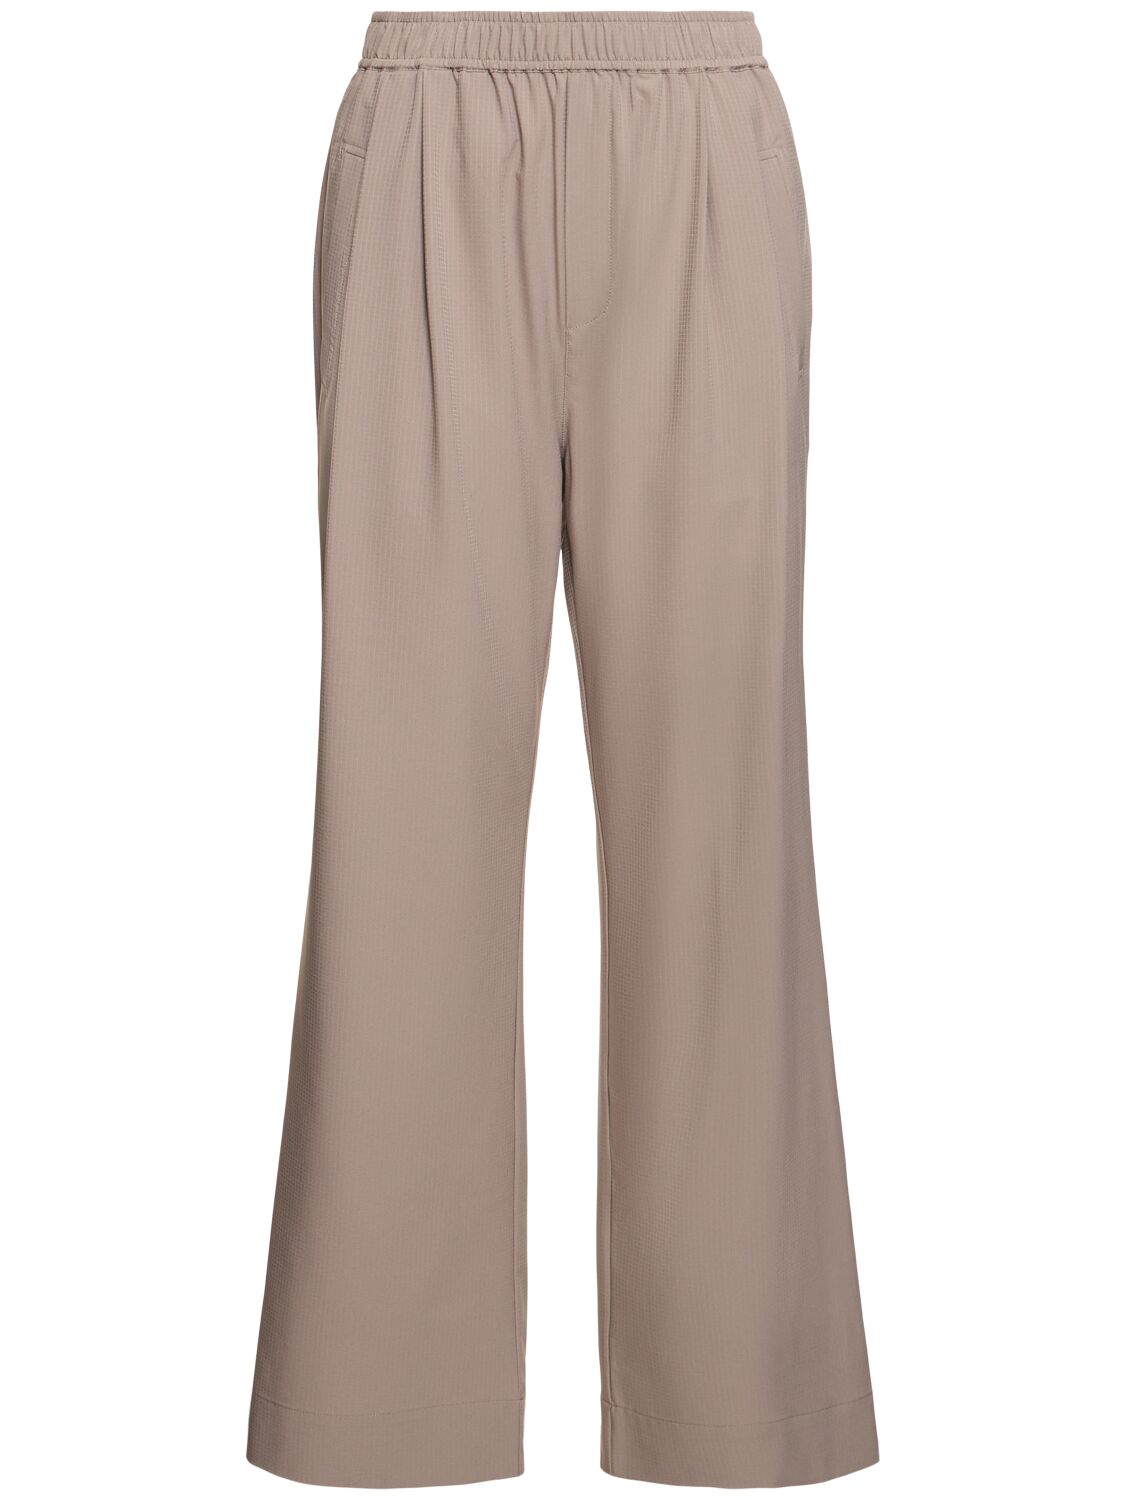 Image of Tacome Pleated Straight Pants